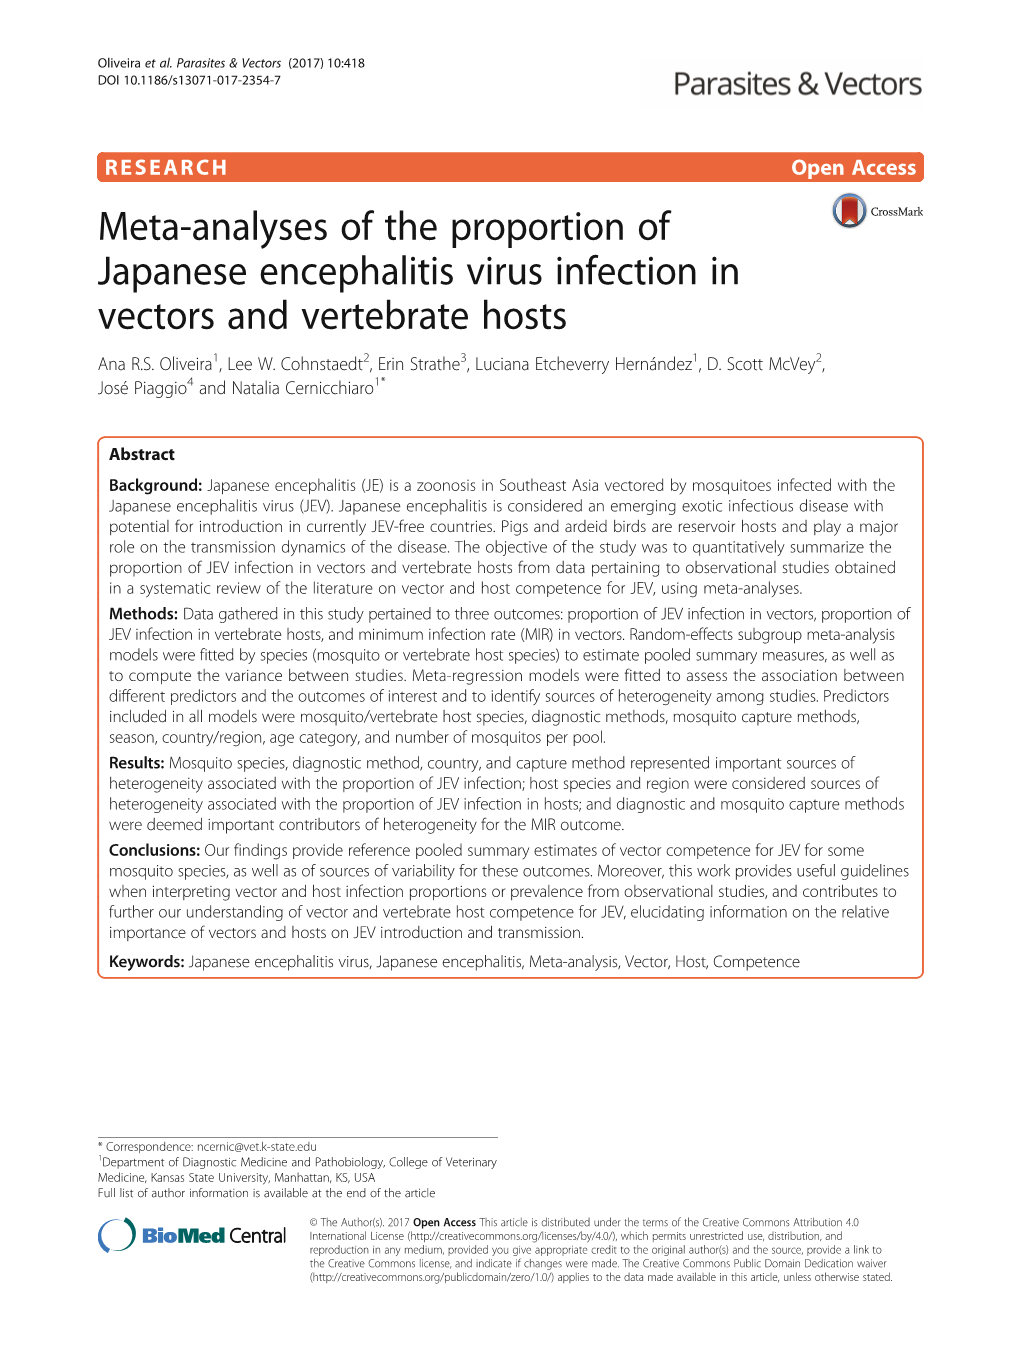 Meta-Analyses of the Proportion of Japanese Encephalitis Virus Infection in Vectors and Vertebrate Hosts Ana R.S